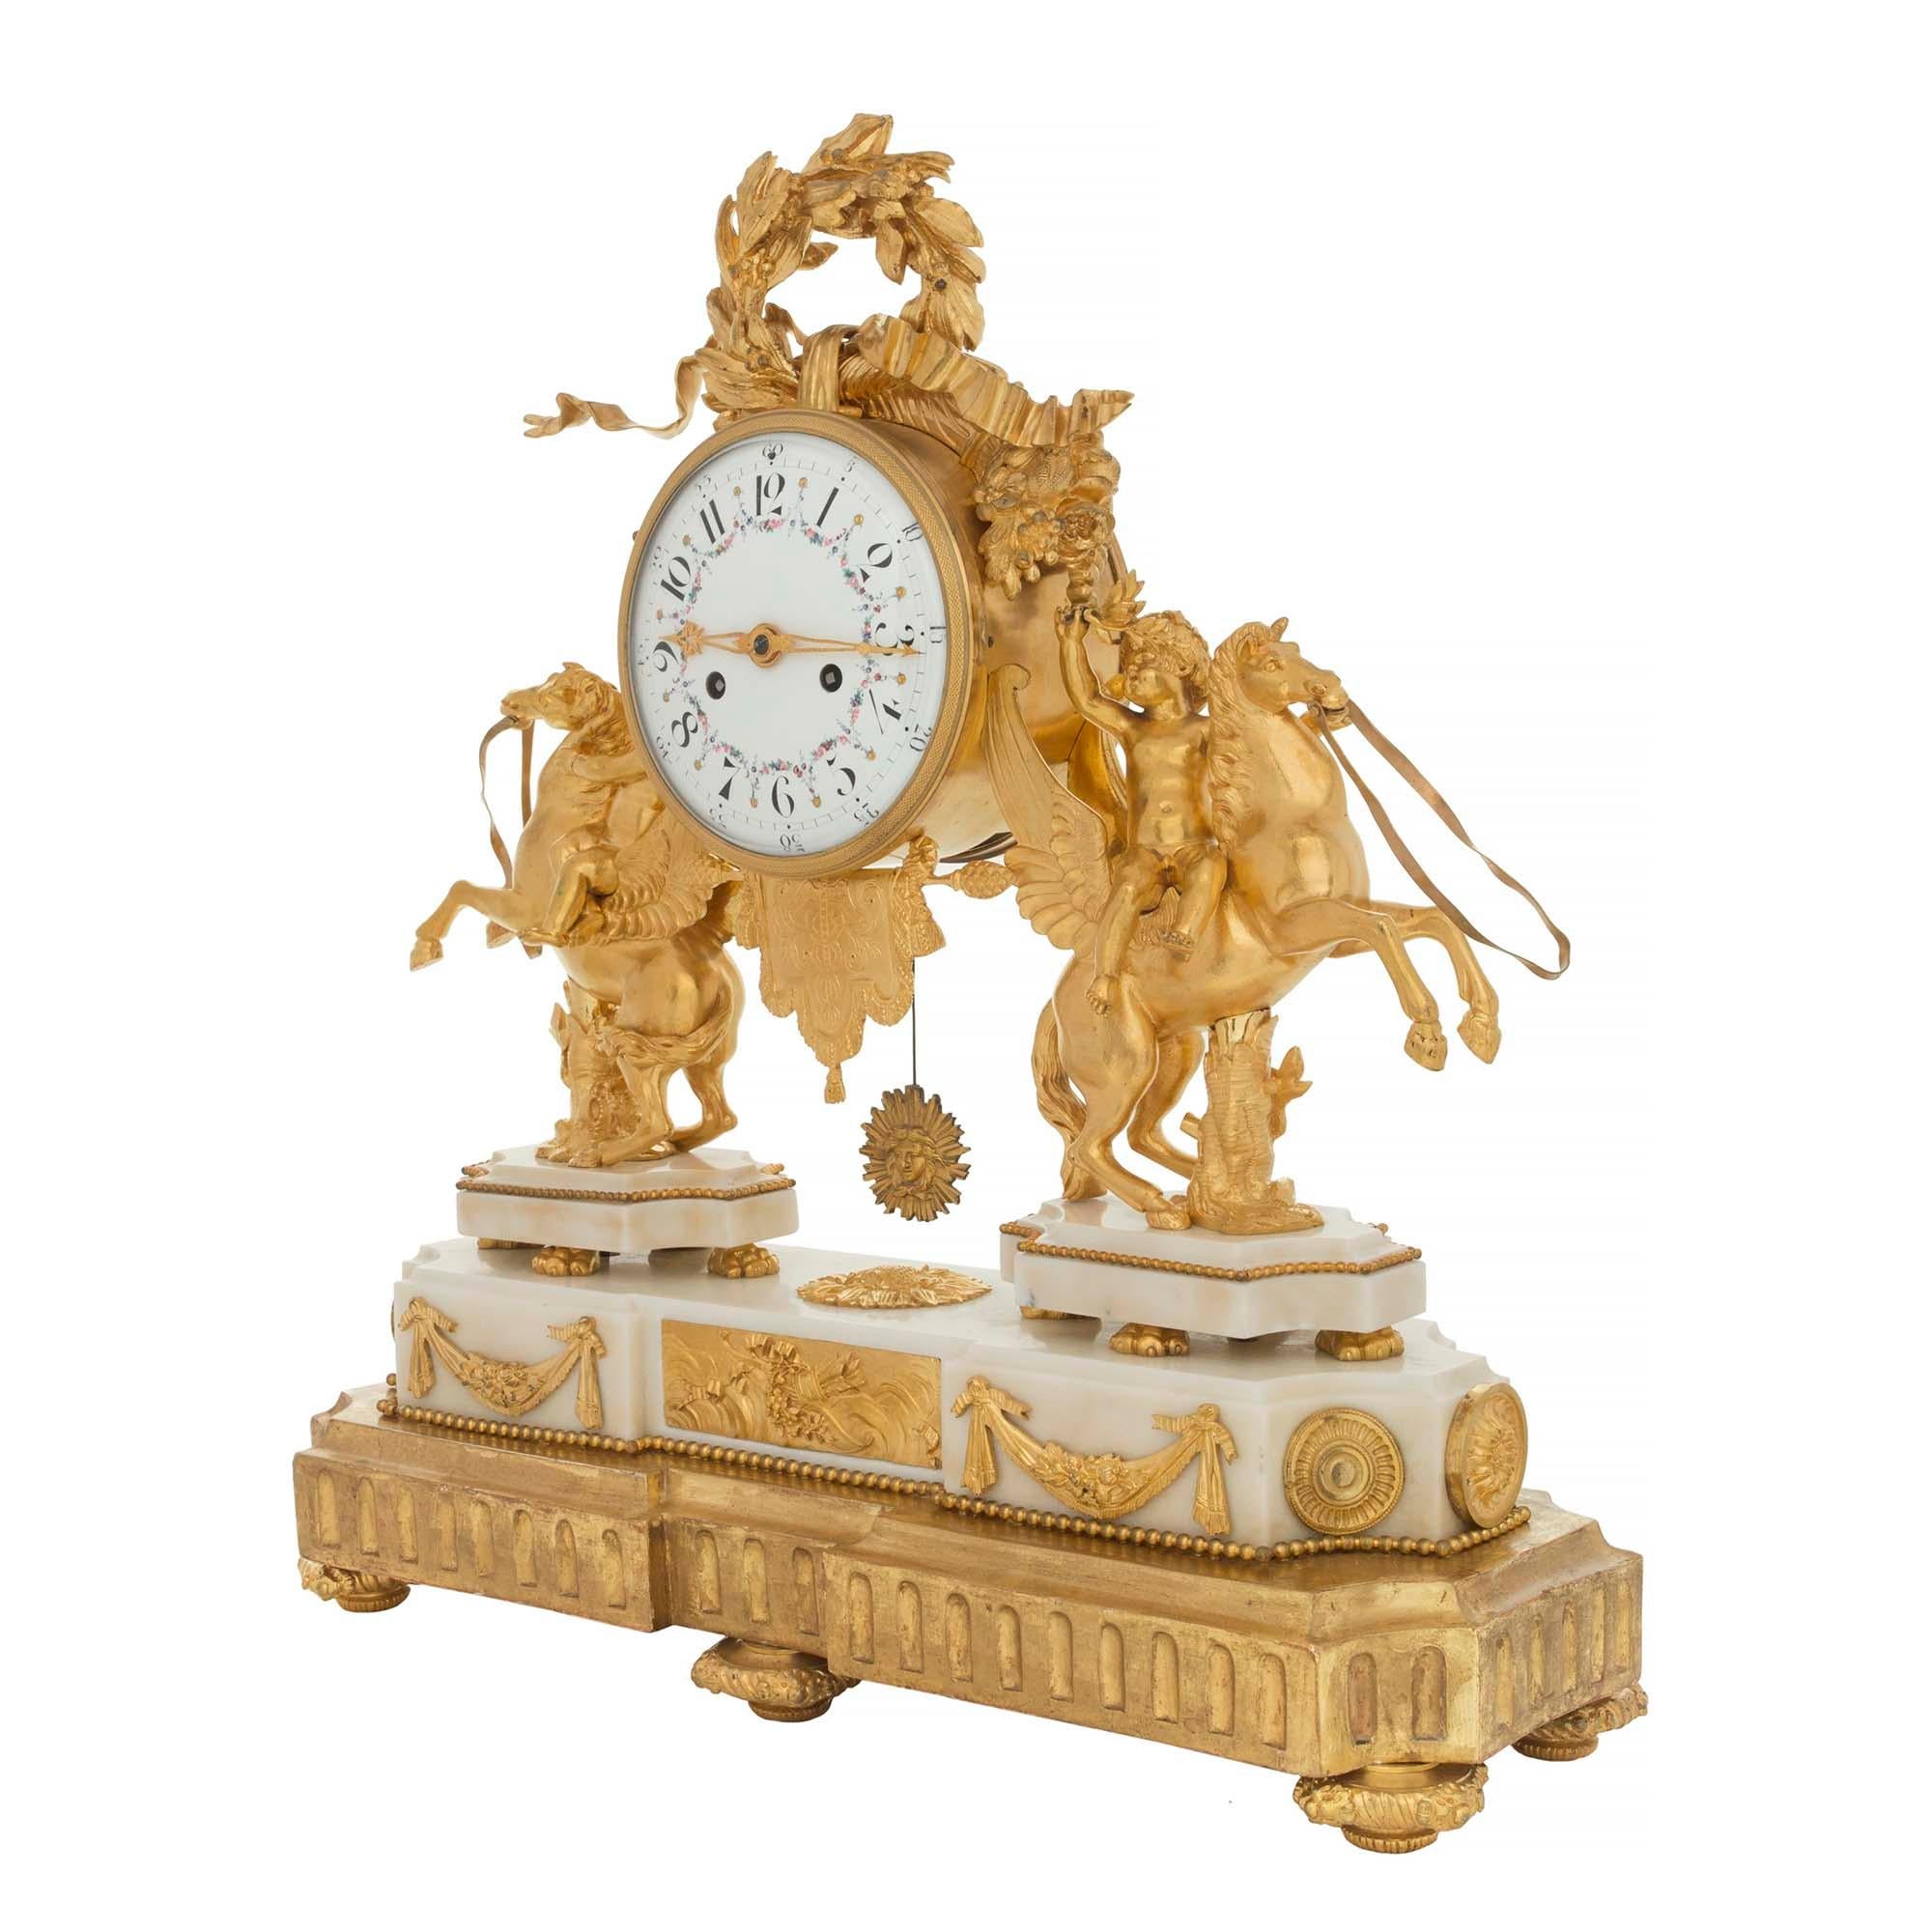 A stunning French early 19th century Louis XVI st. ormolu, white Carrara marble and giltwood clock. The clock is raised by a fine giltwood base which mimics the most decorative shape of the clock. The base of the clock displays topie shaped feet,